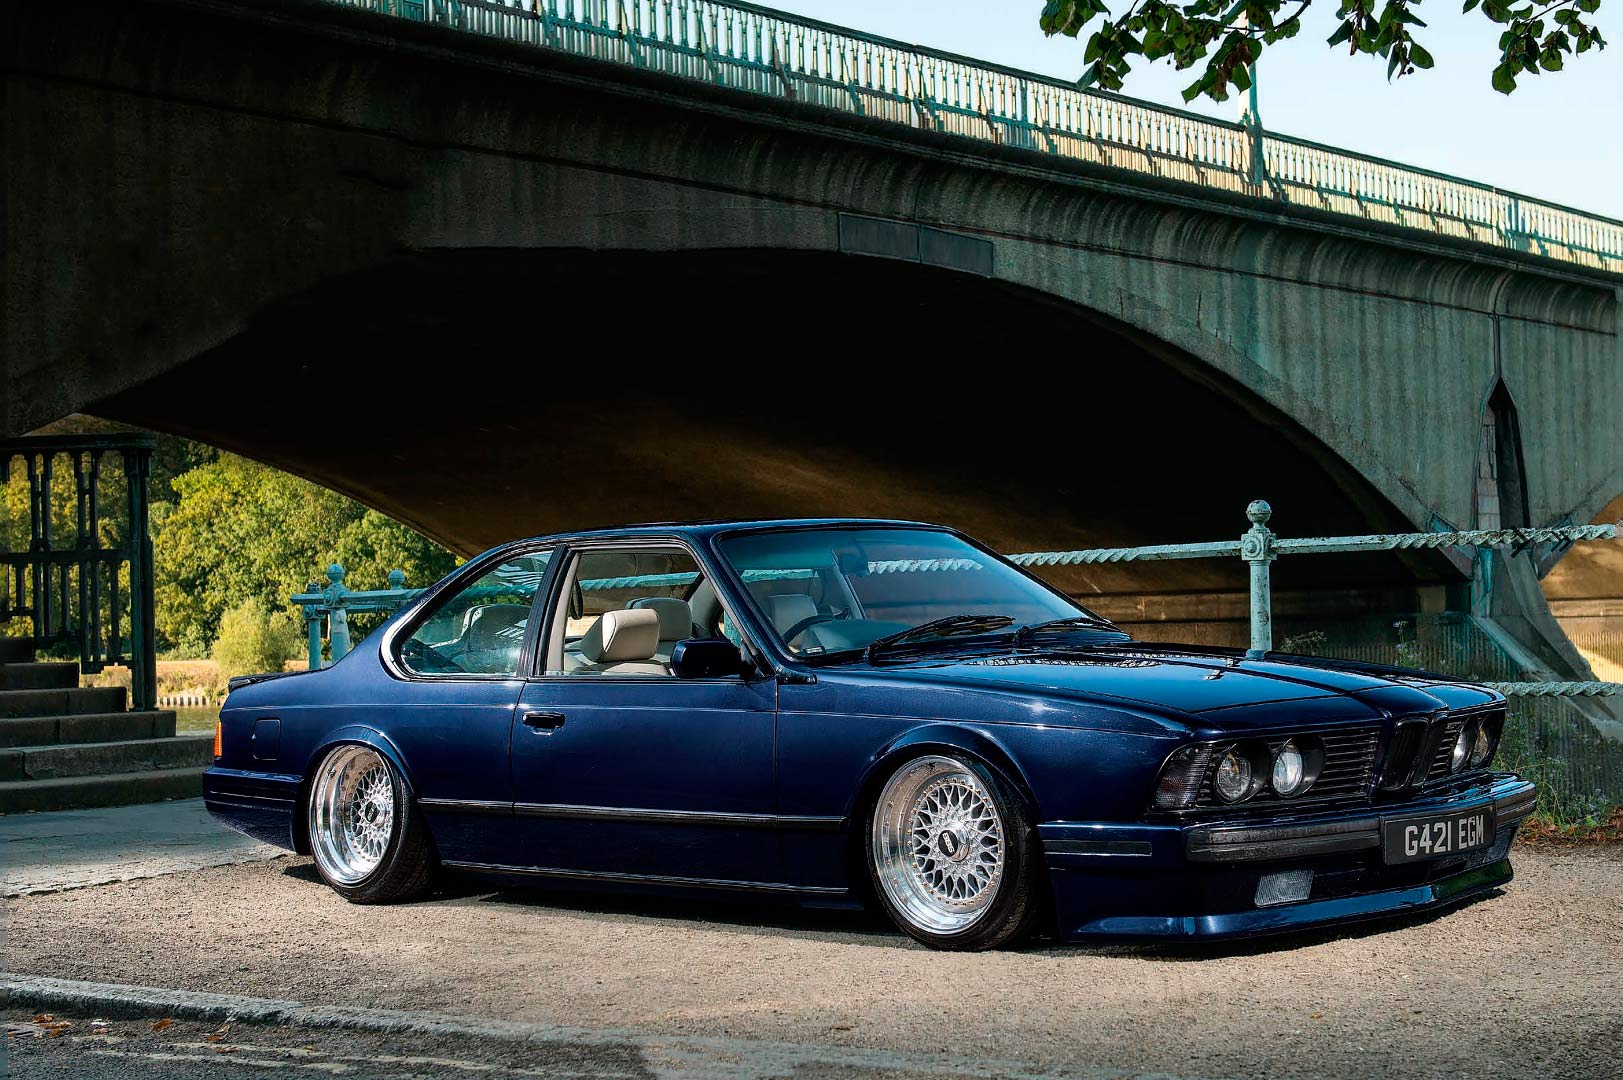 Stanced Bmw 635csi E24 Air Ride And s By George Assi Drive My Blogs Drive